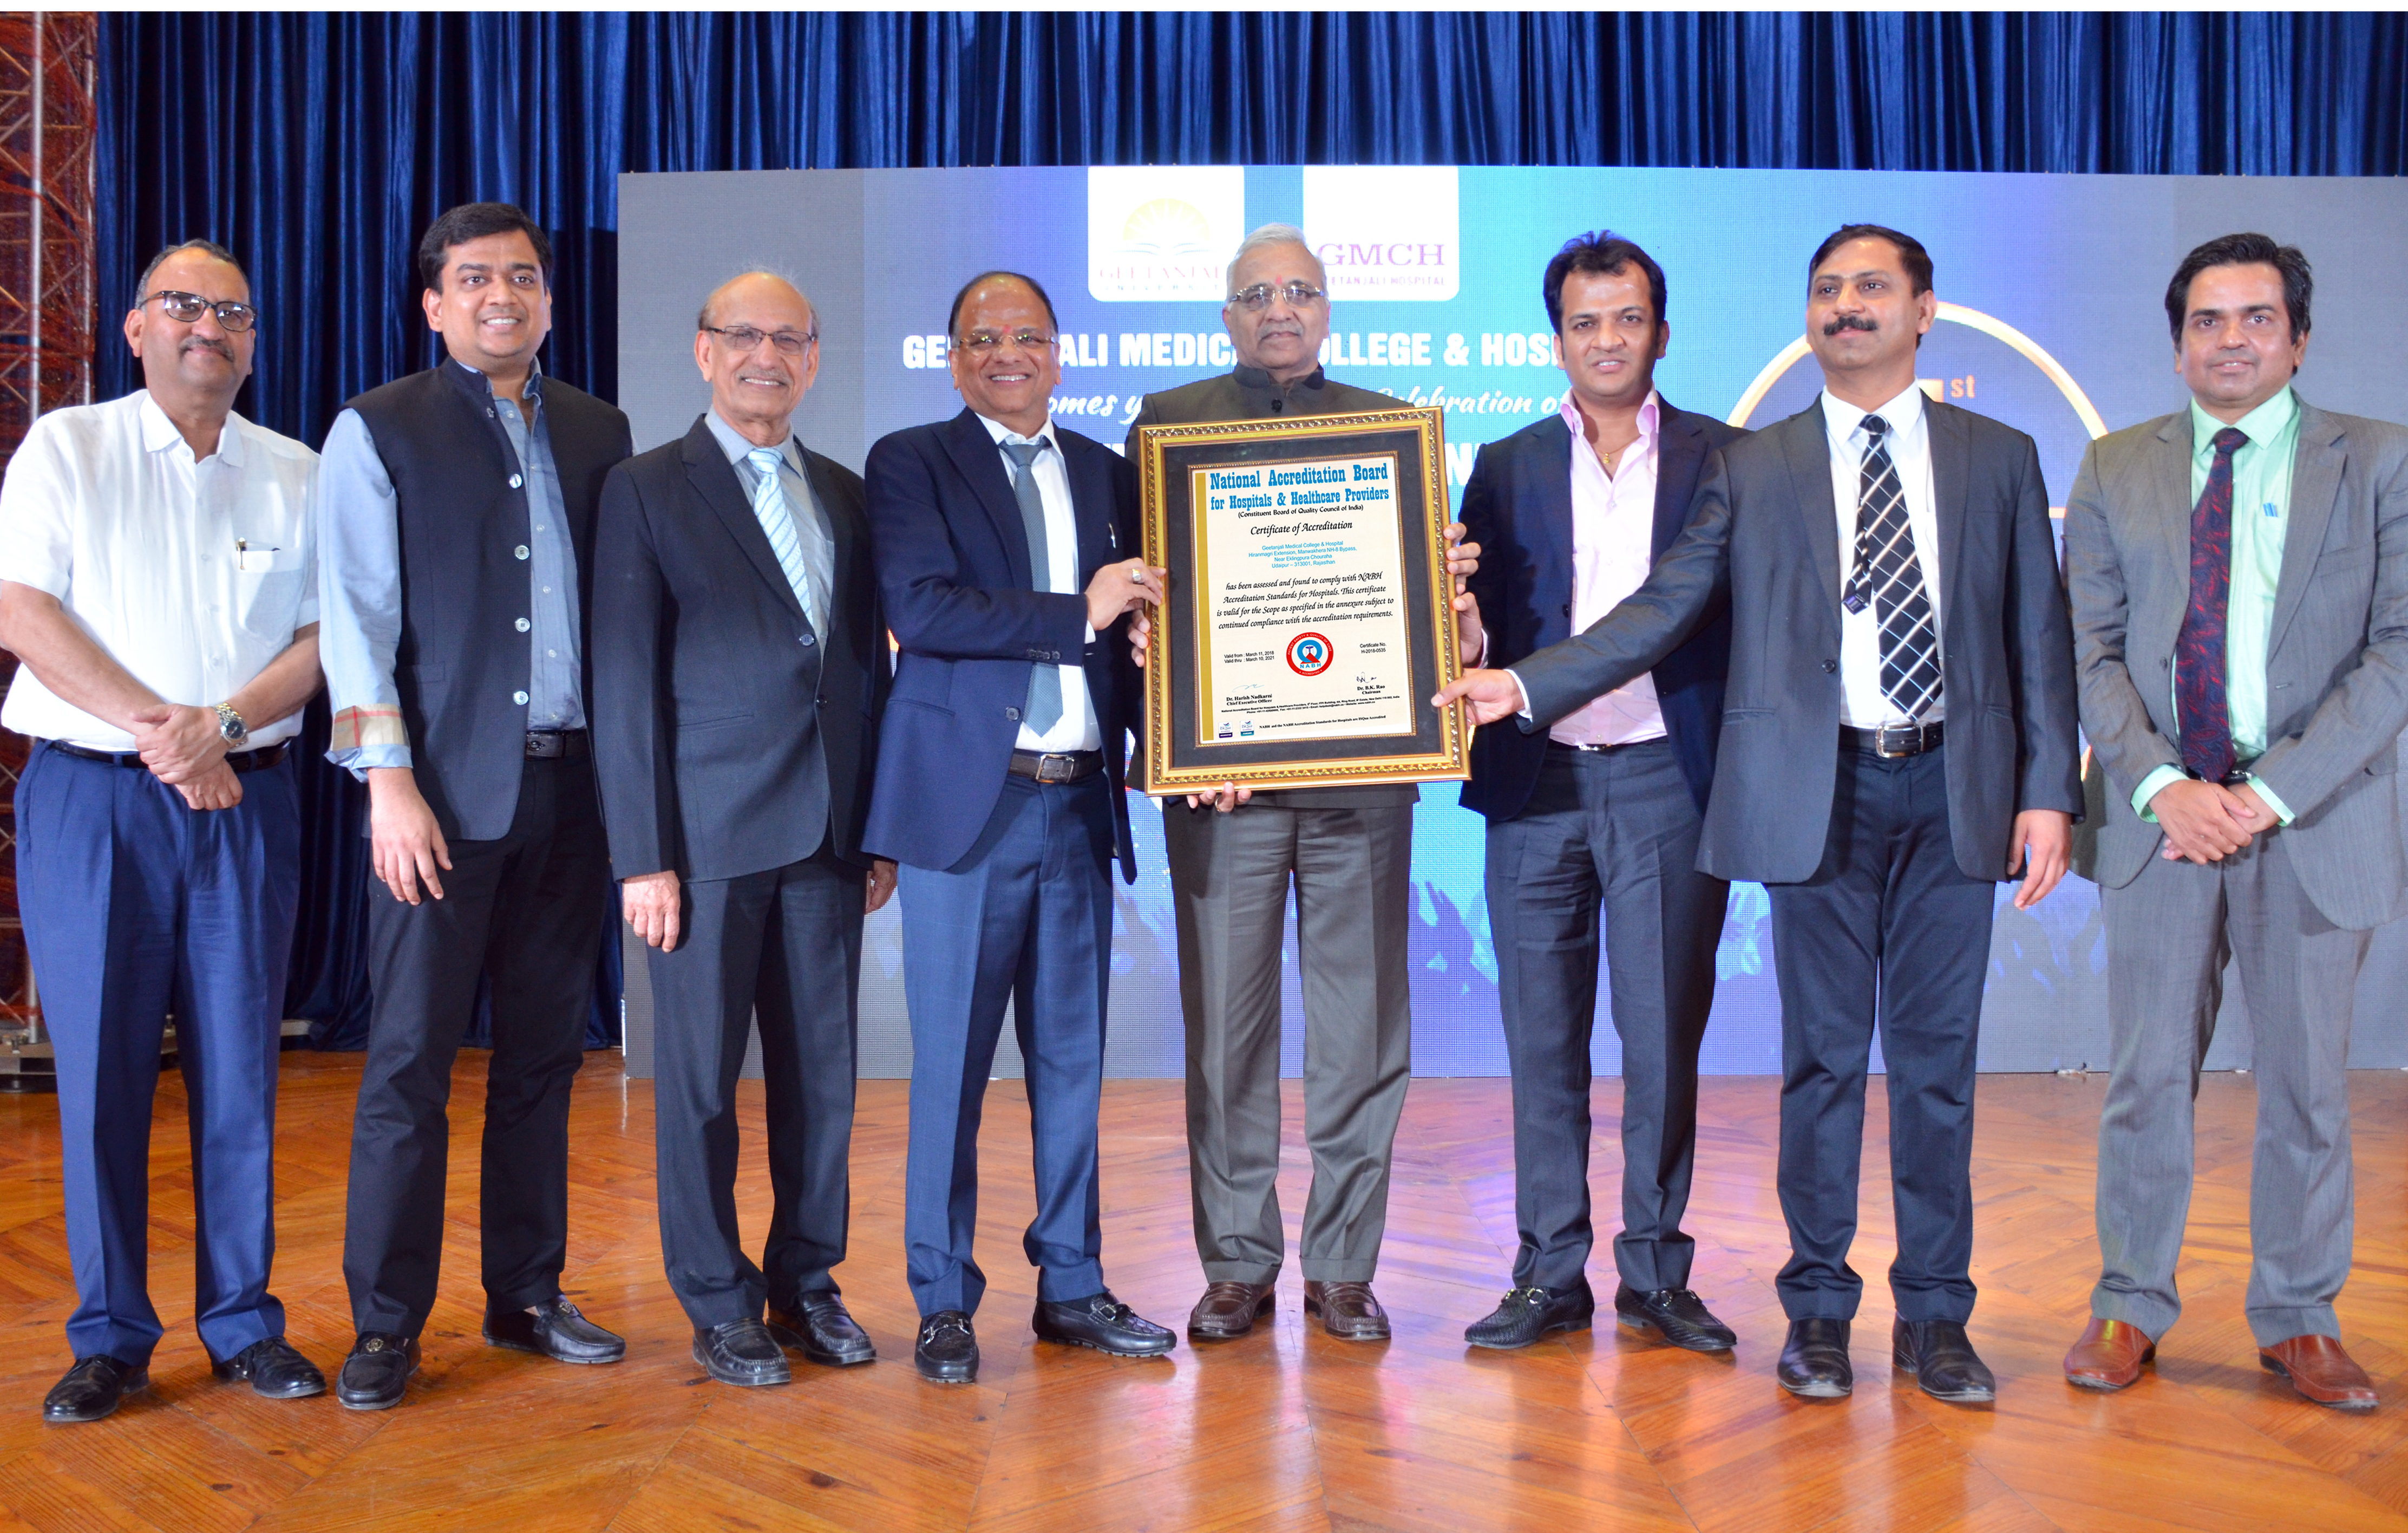 “GMCH: First Medical College & Hospital in Rajasthan to receive NABH Accreditation”